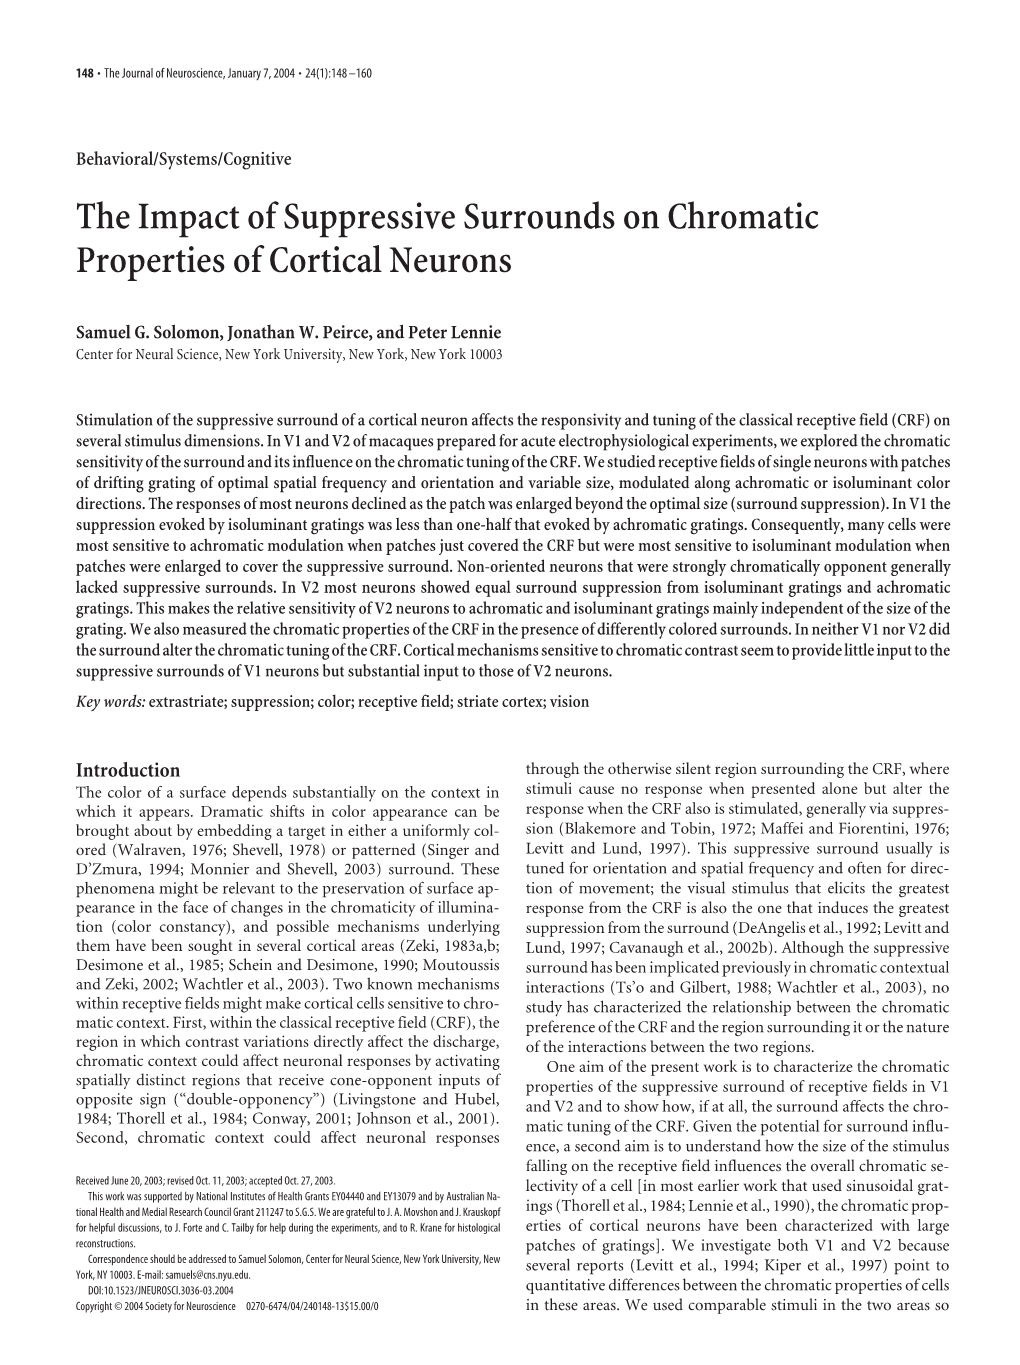 The Impact of Suppressive Surrounds on Chromatic Properties of Cortical Neurons